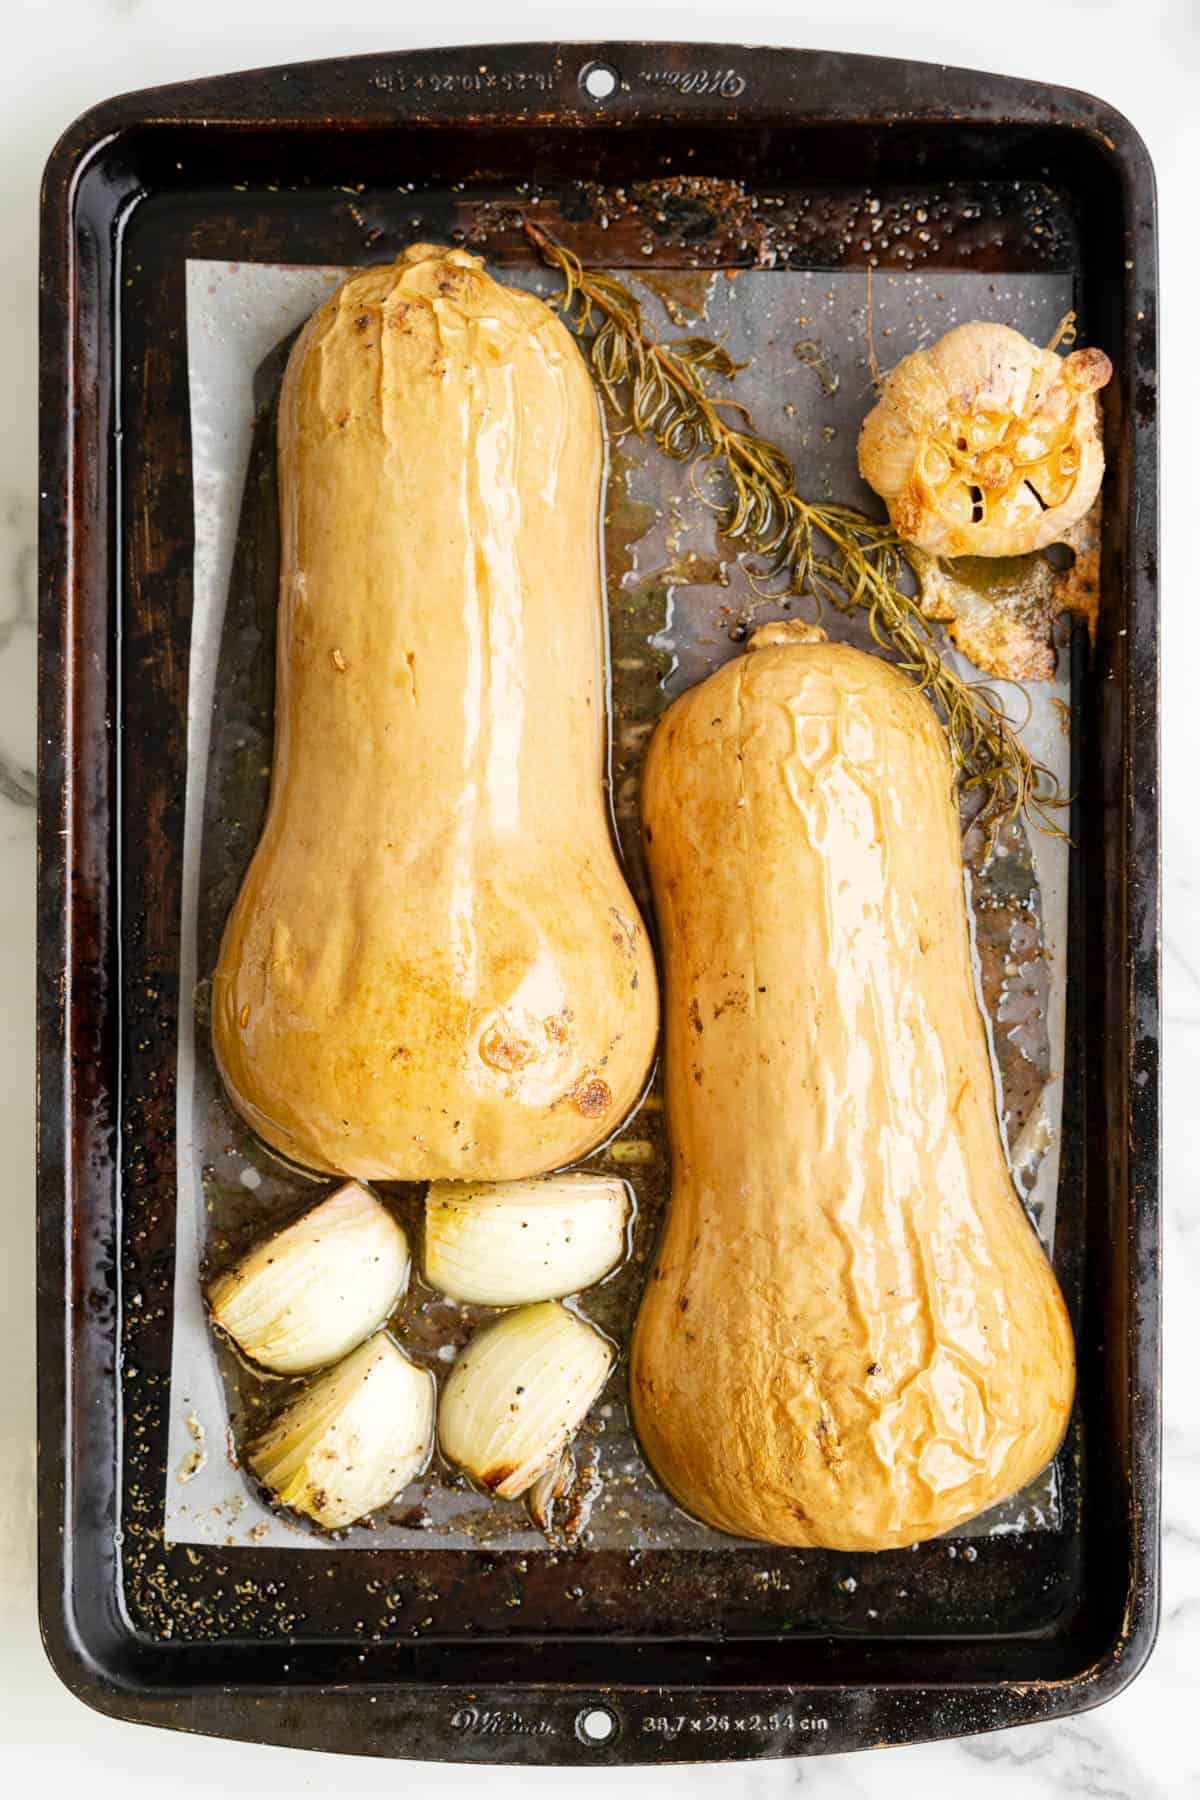 Roasted butternut squash and other vegetables on a baking sheet.